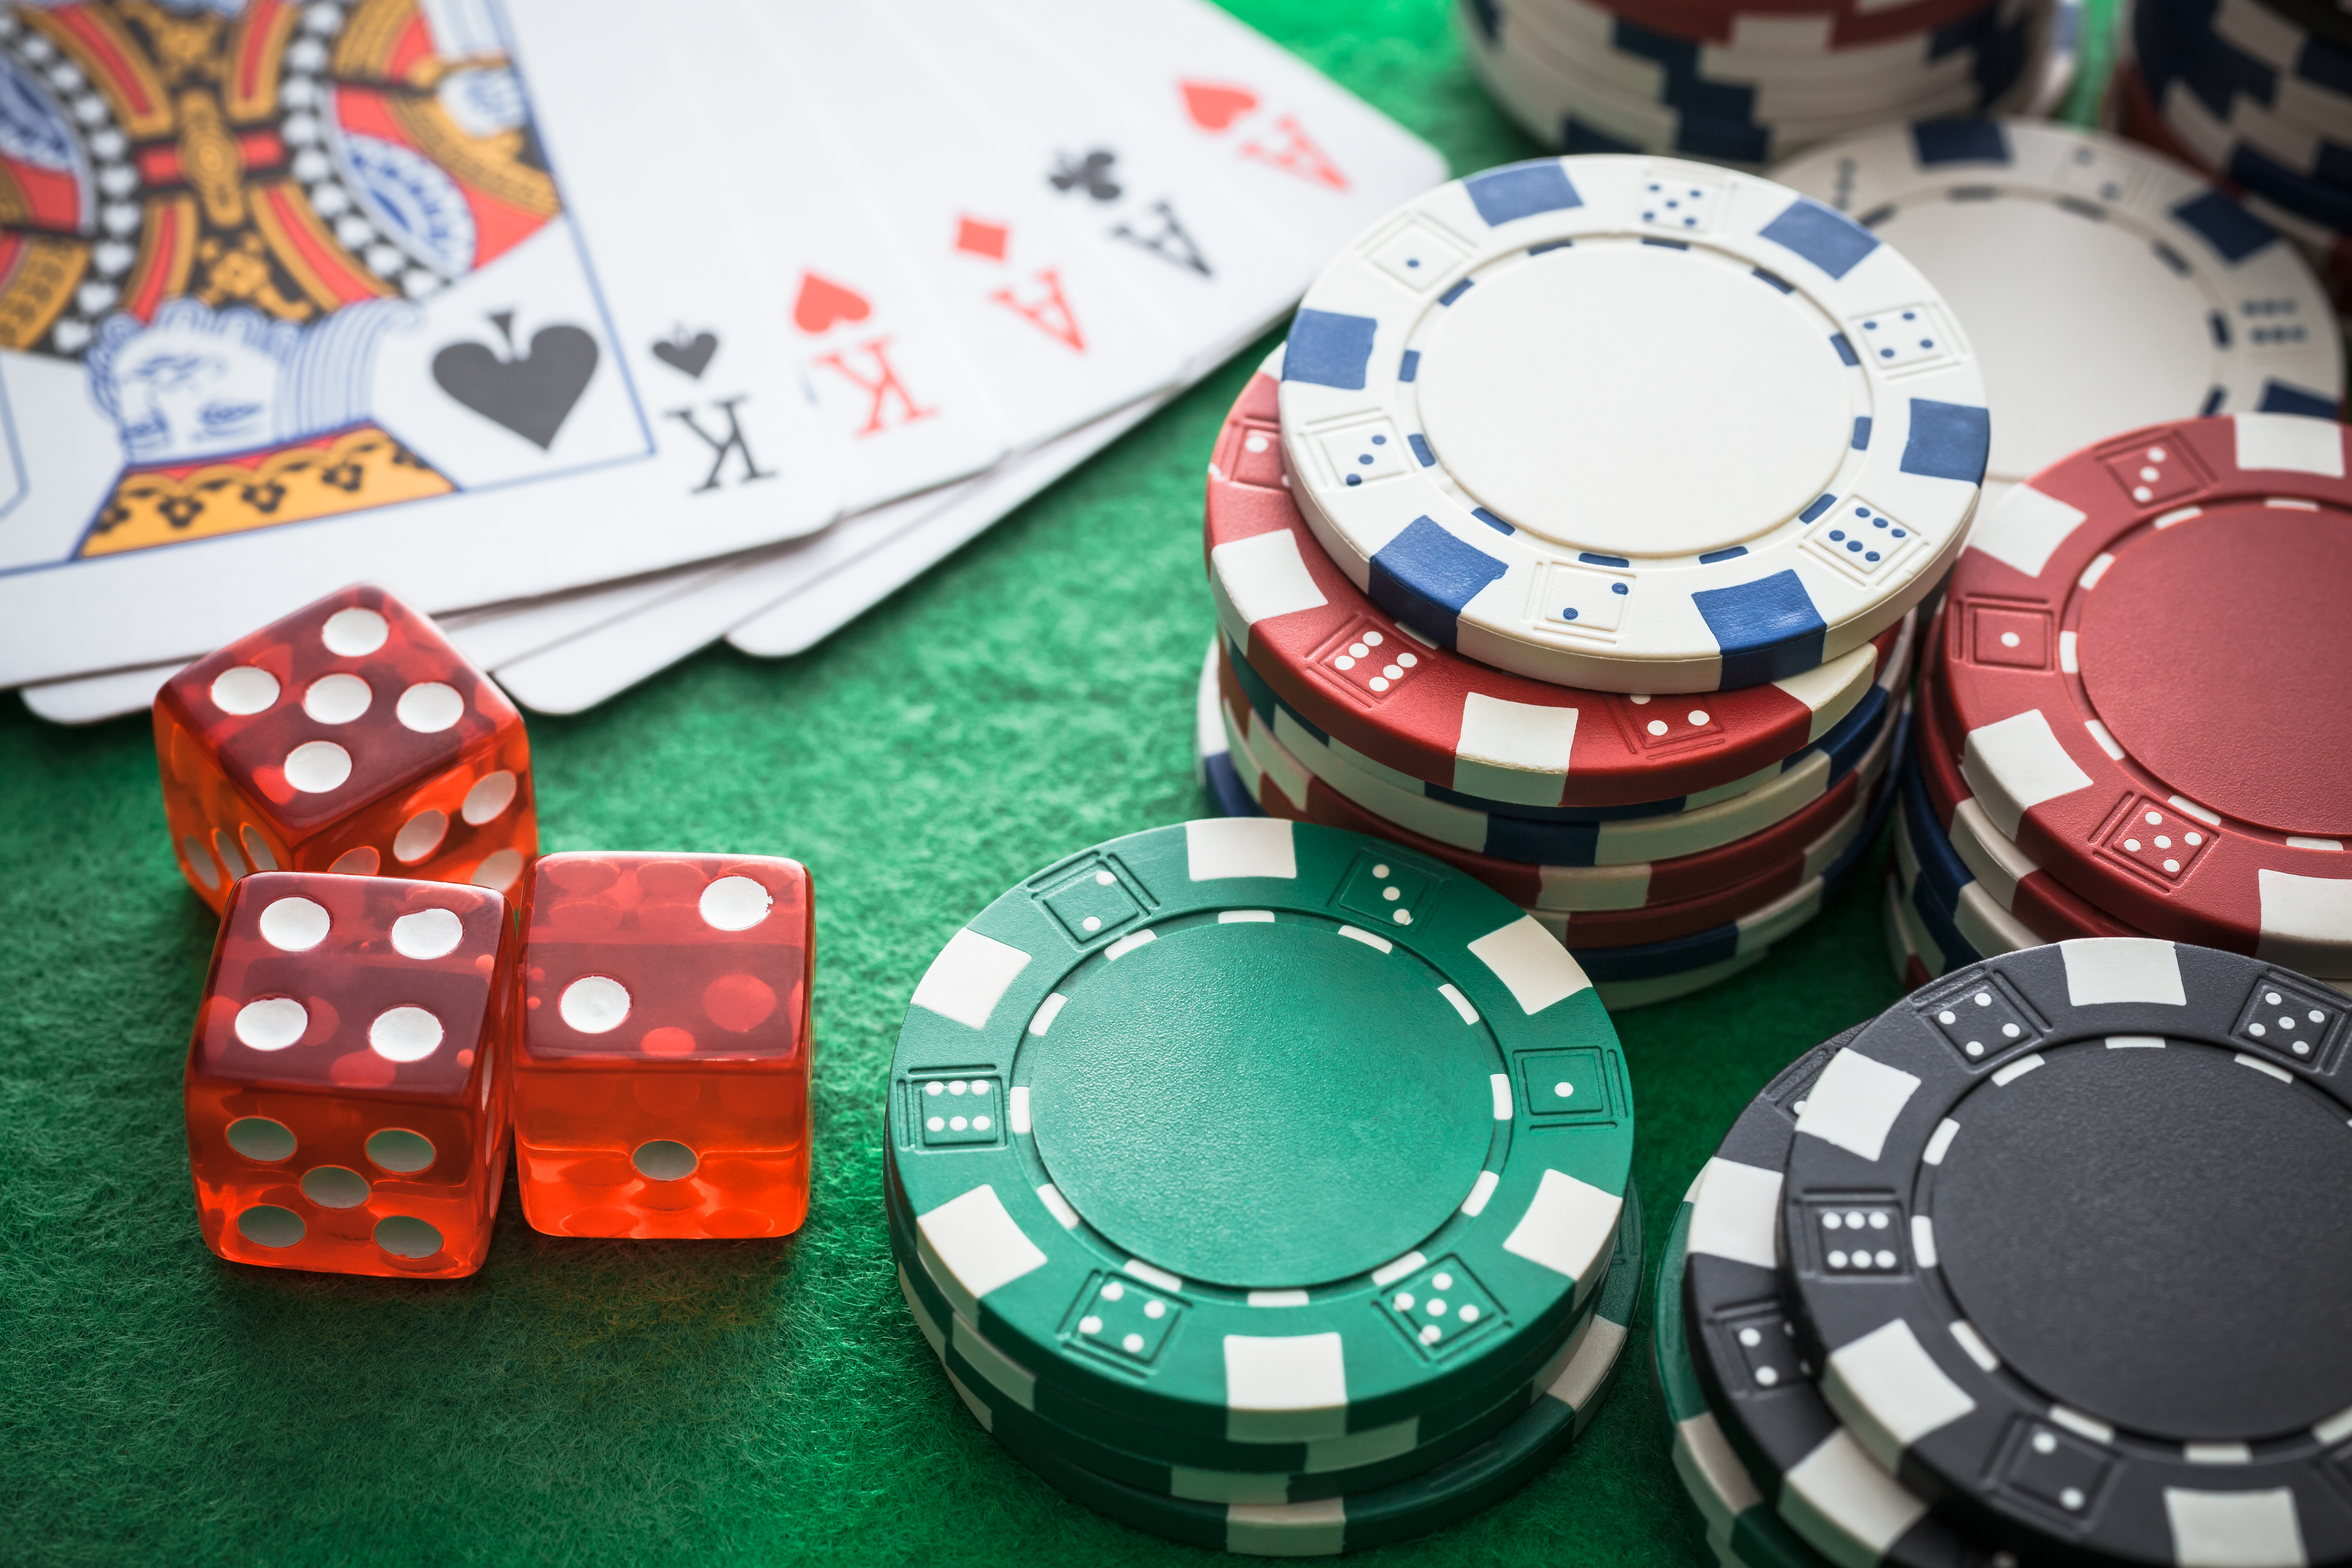 Play The Best Casino Games And Claim Huge Bonuses At Bet365